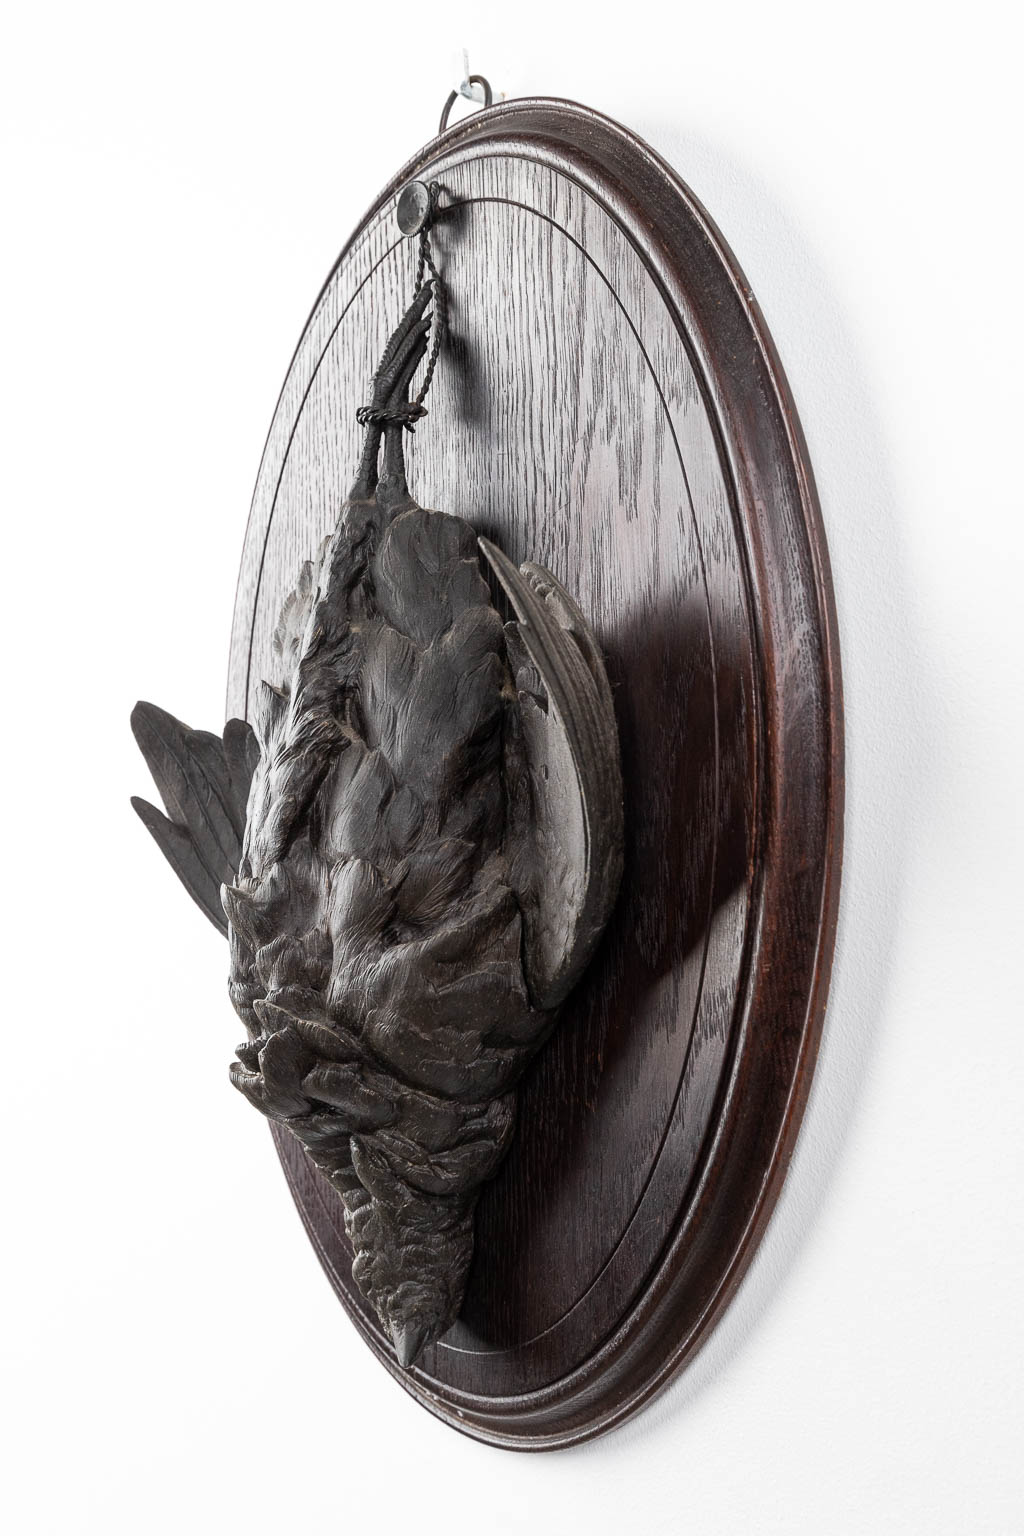 A pair of wall-mounted 'Hunting Trophies', patinated bronze mounted on wood. (D:7 x W:33 x H:46 cm) - Image 14 of 15